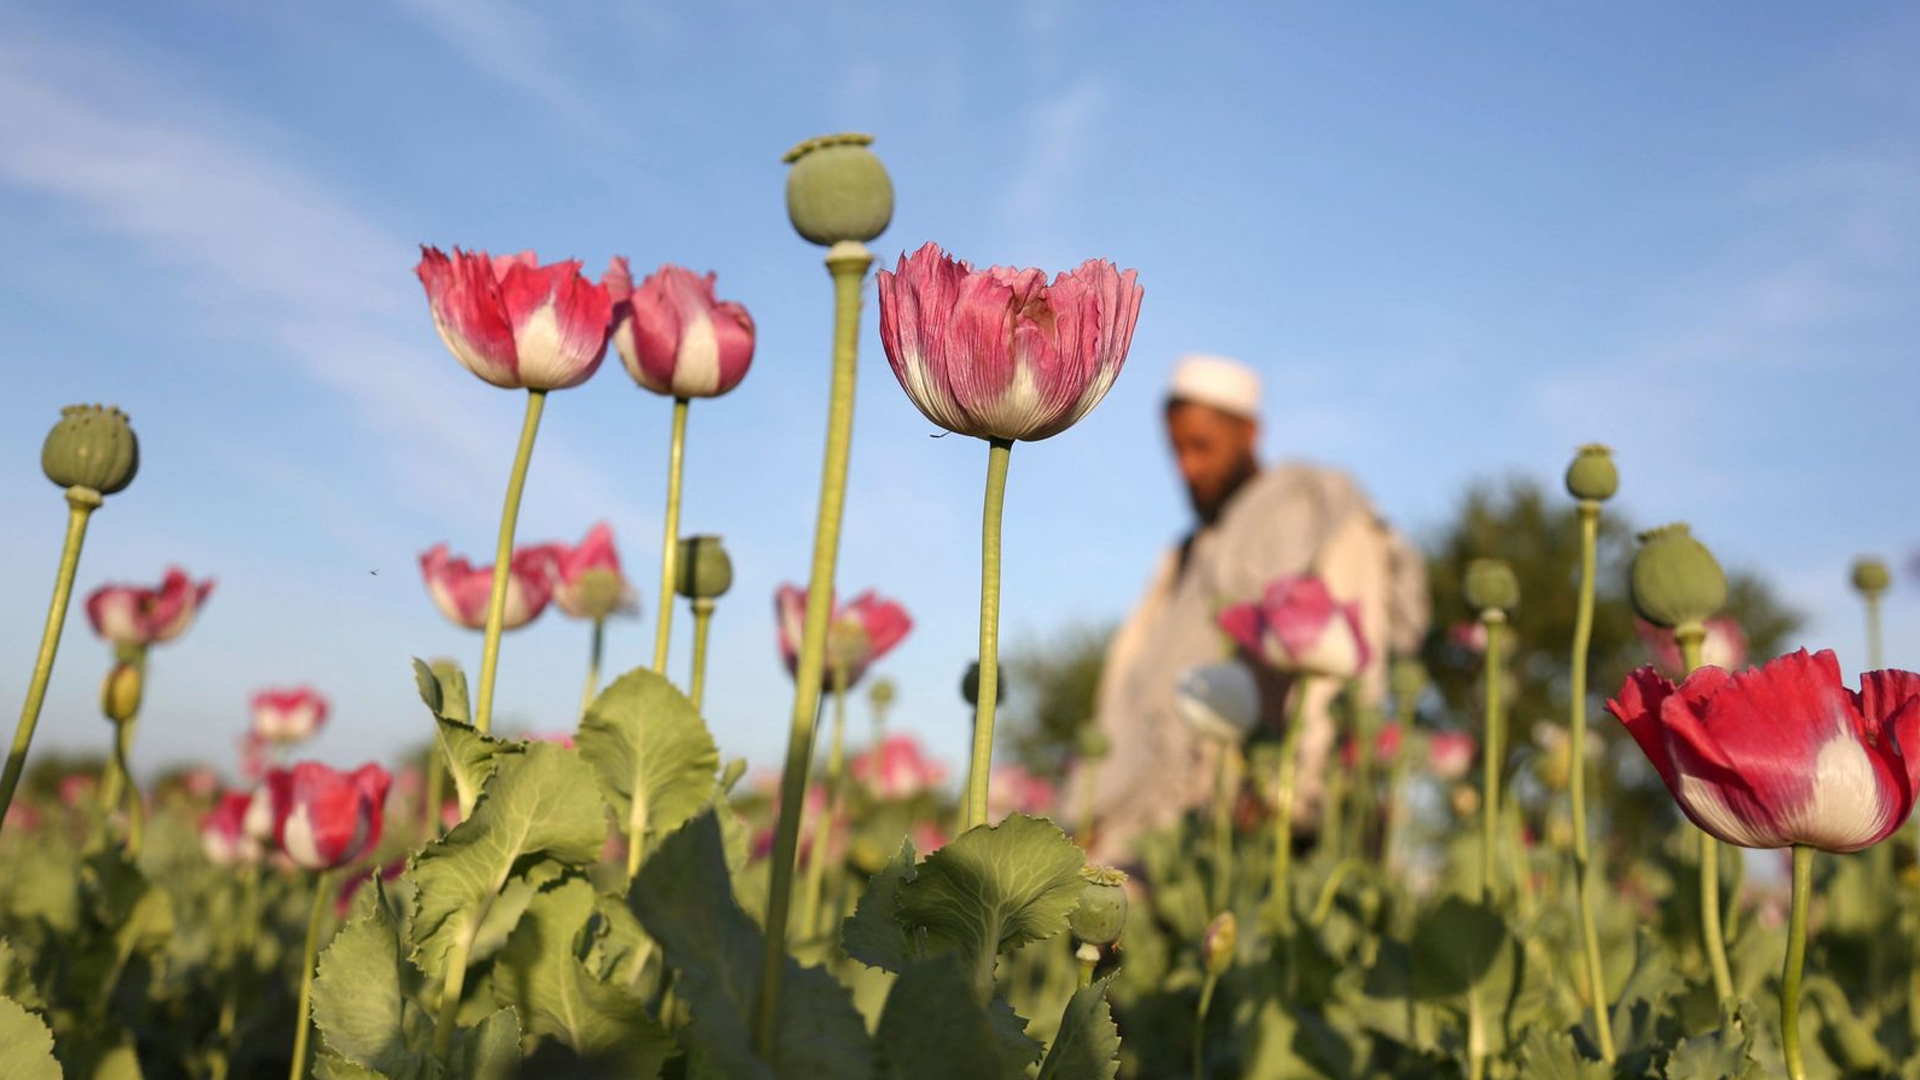  The Islamic Emirate banned poppy cultivation and drug production in the country